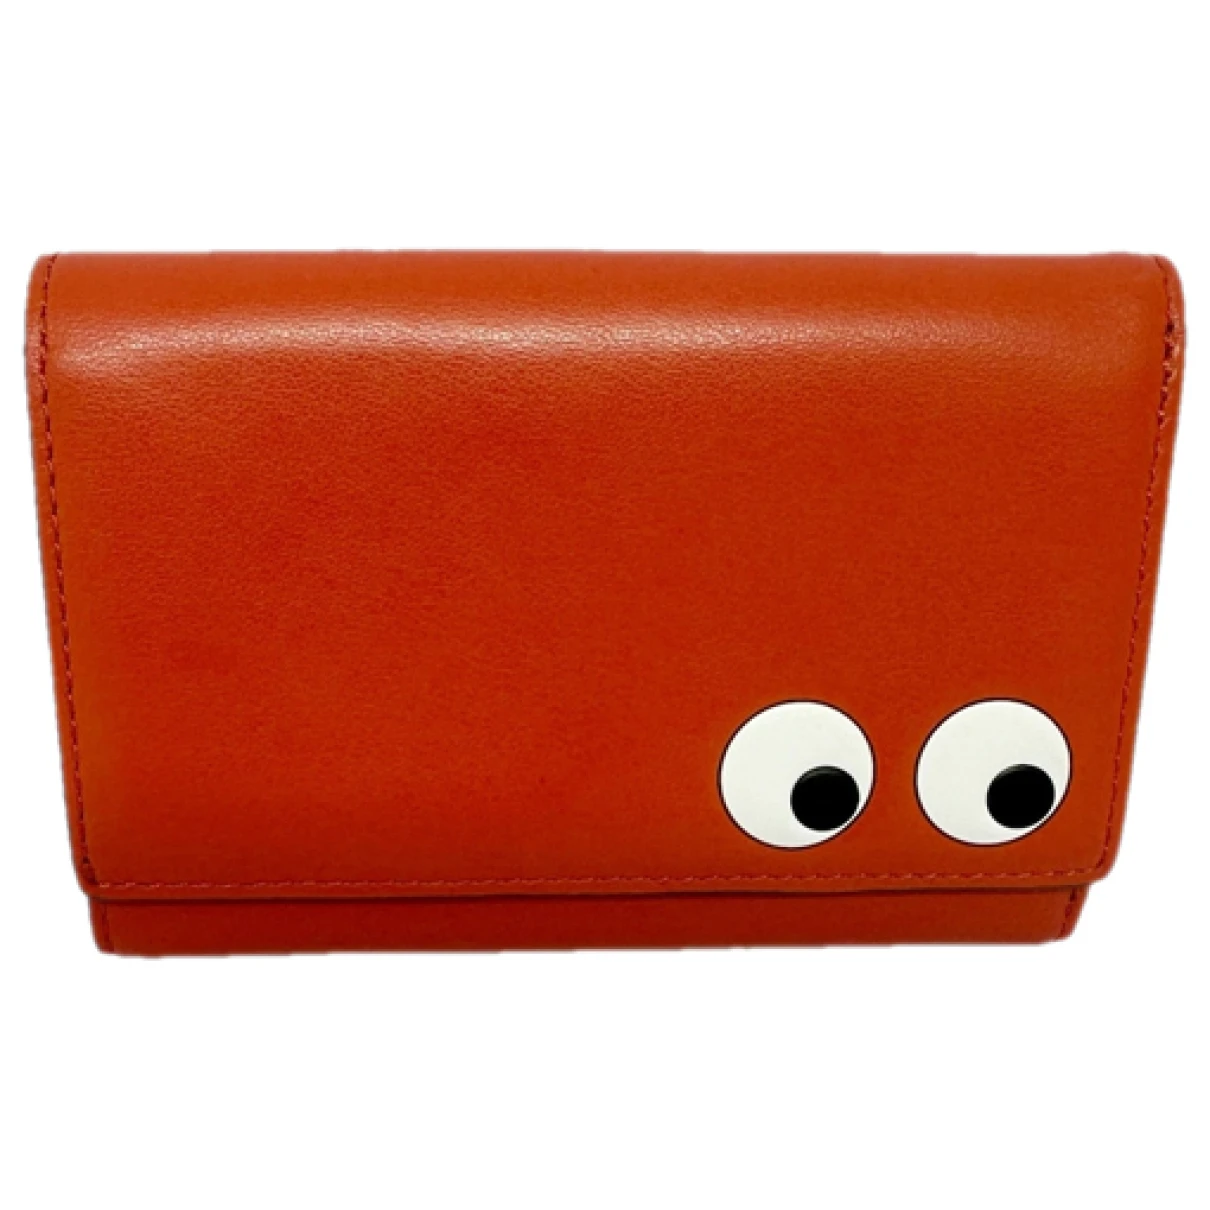 Pre-owned Anya Hindmarch Leather Purse In Orange